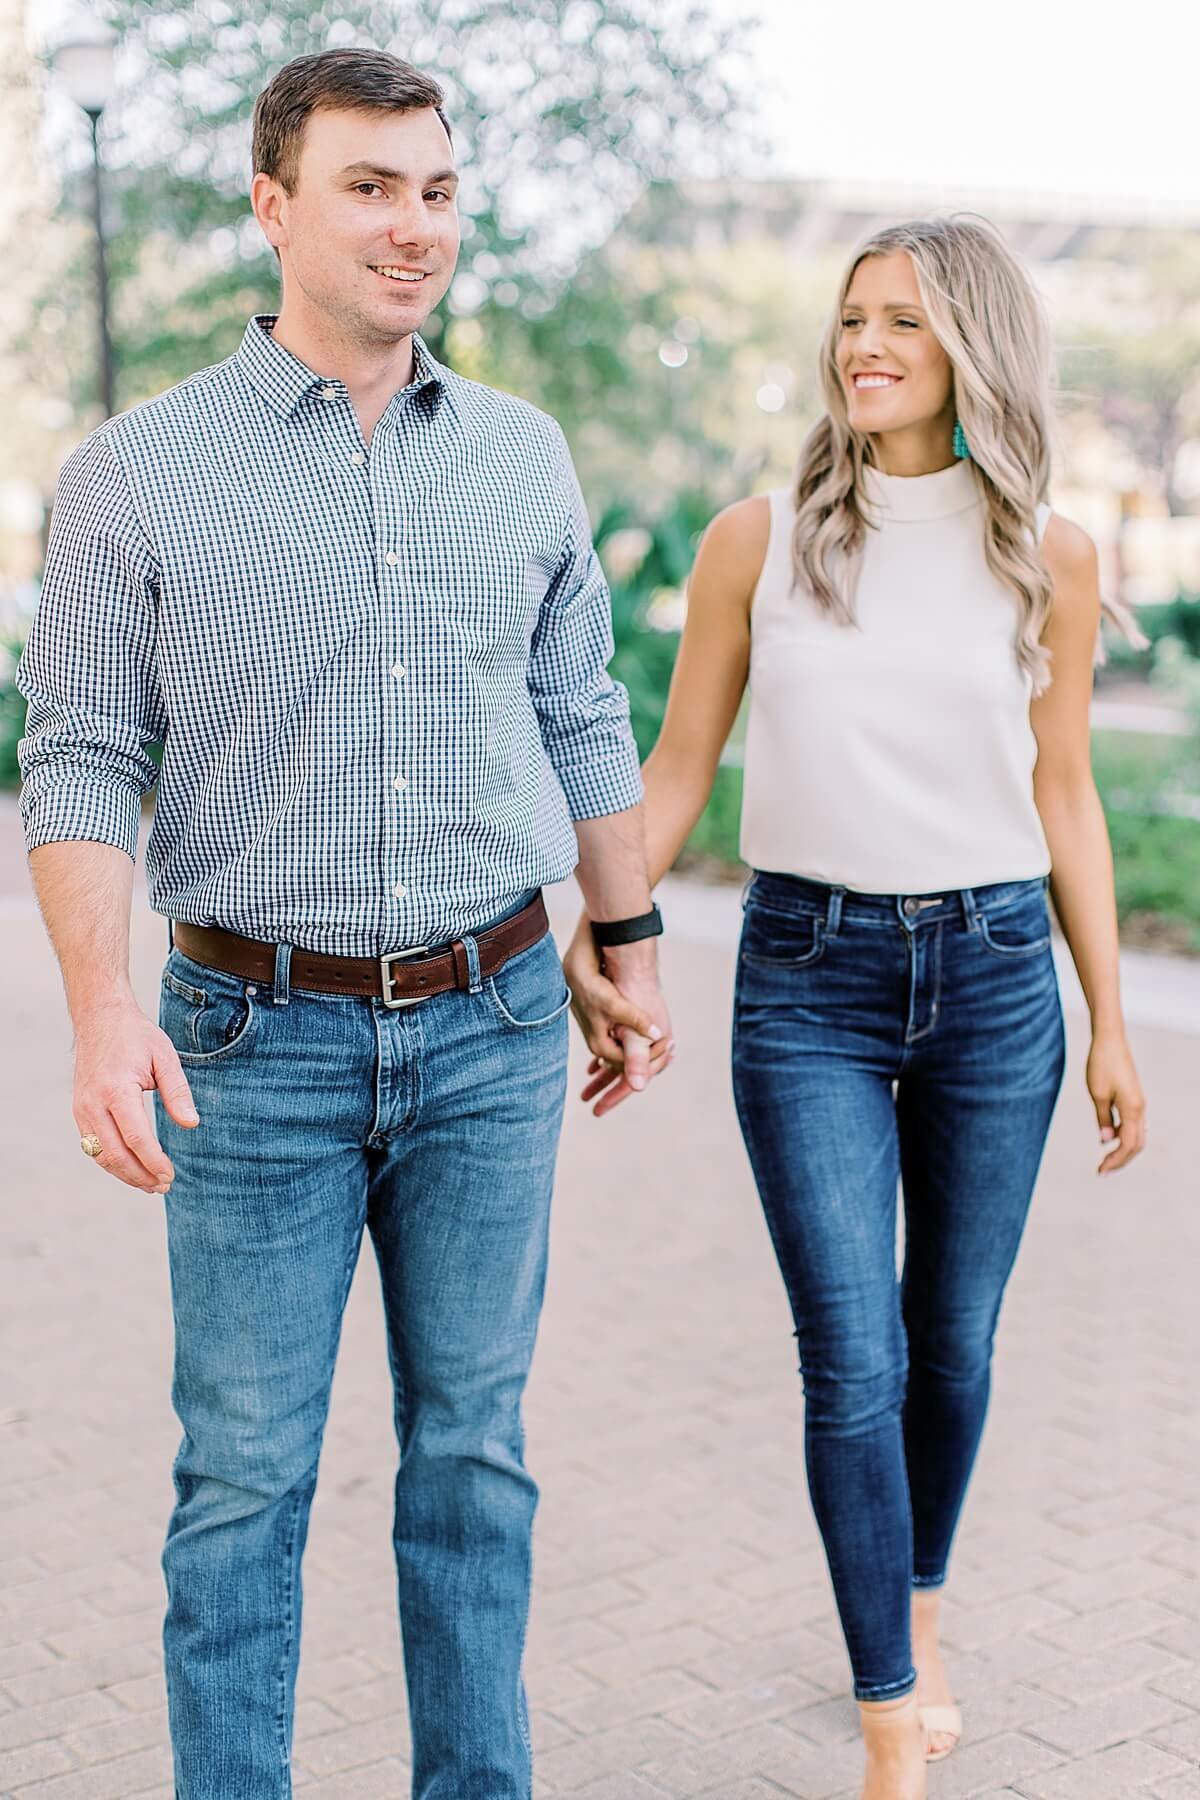 Engagement Session at Texas A&M by Houston Wedding Photographer Alicia Yarrish Photography_0007